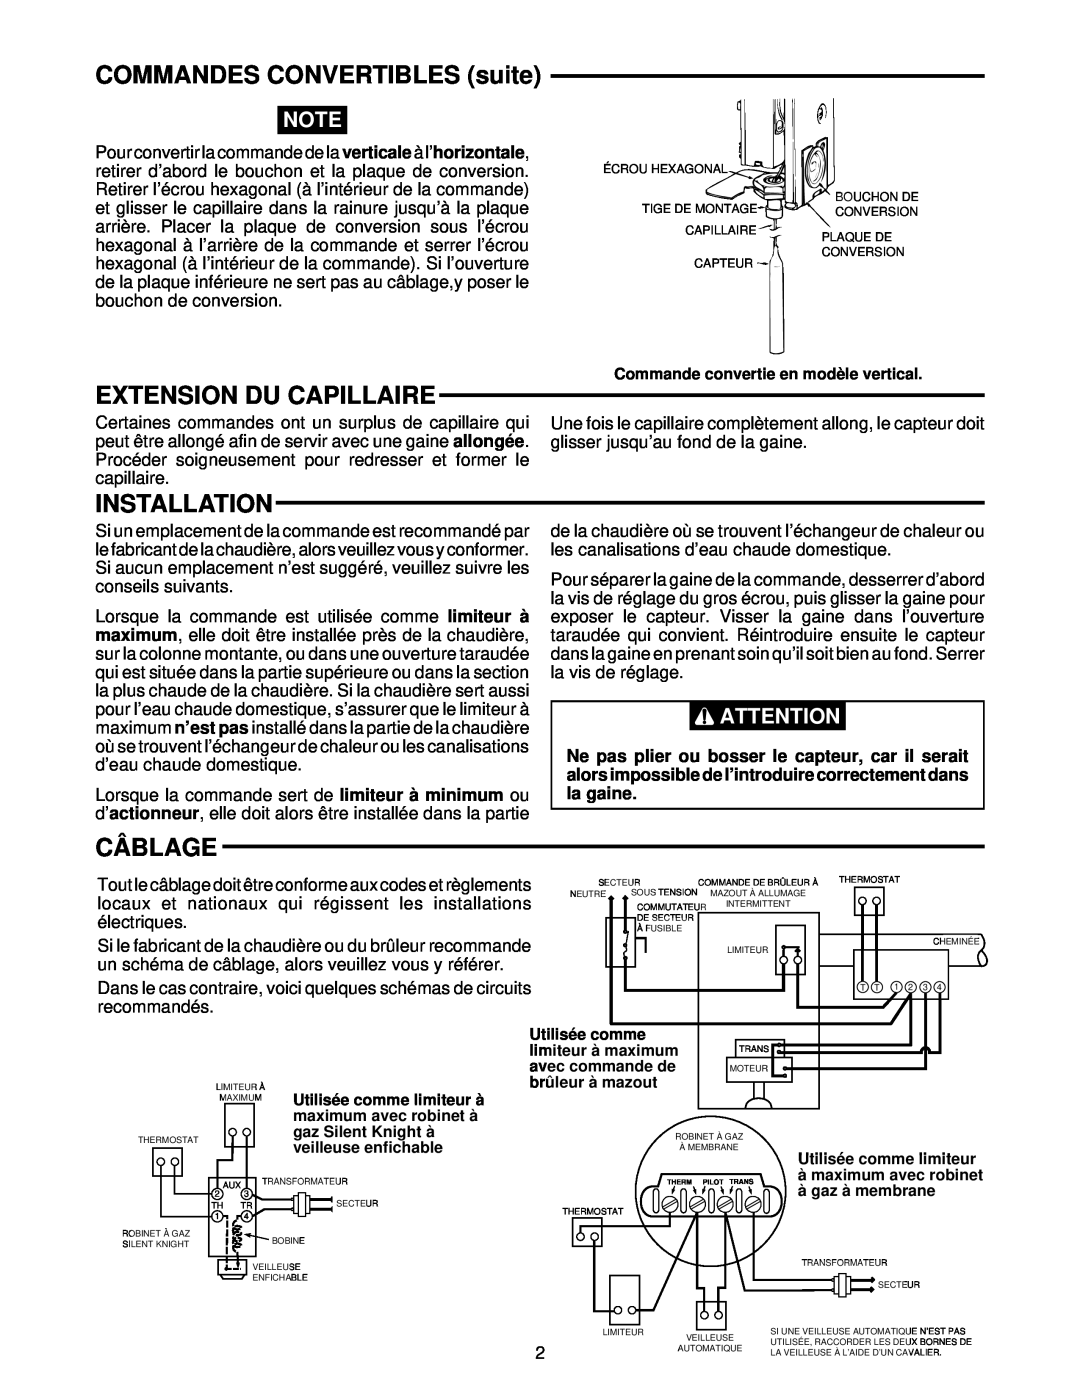 White Rodgers 11B18 installation instructions COMMANDES CONVERTIBLES suite, Extension Du Capillaire, Câblage, Installation 